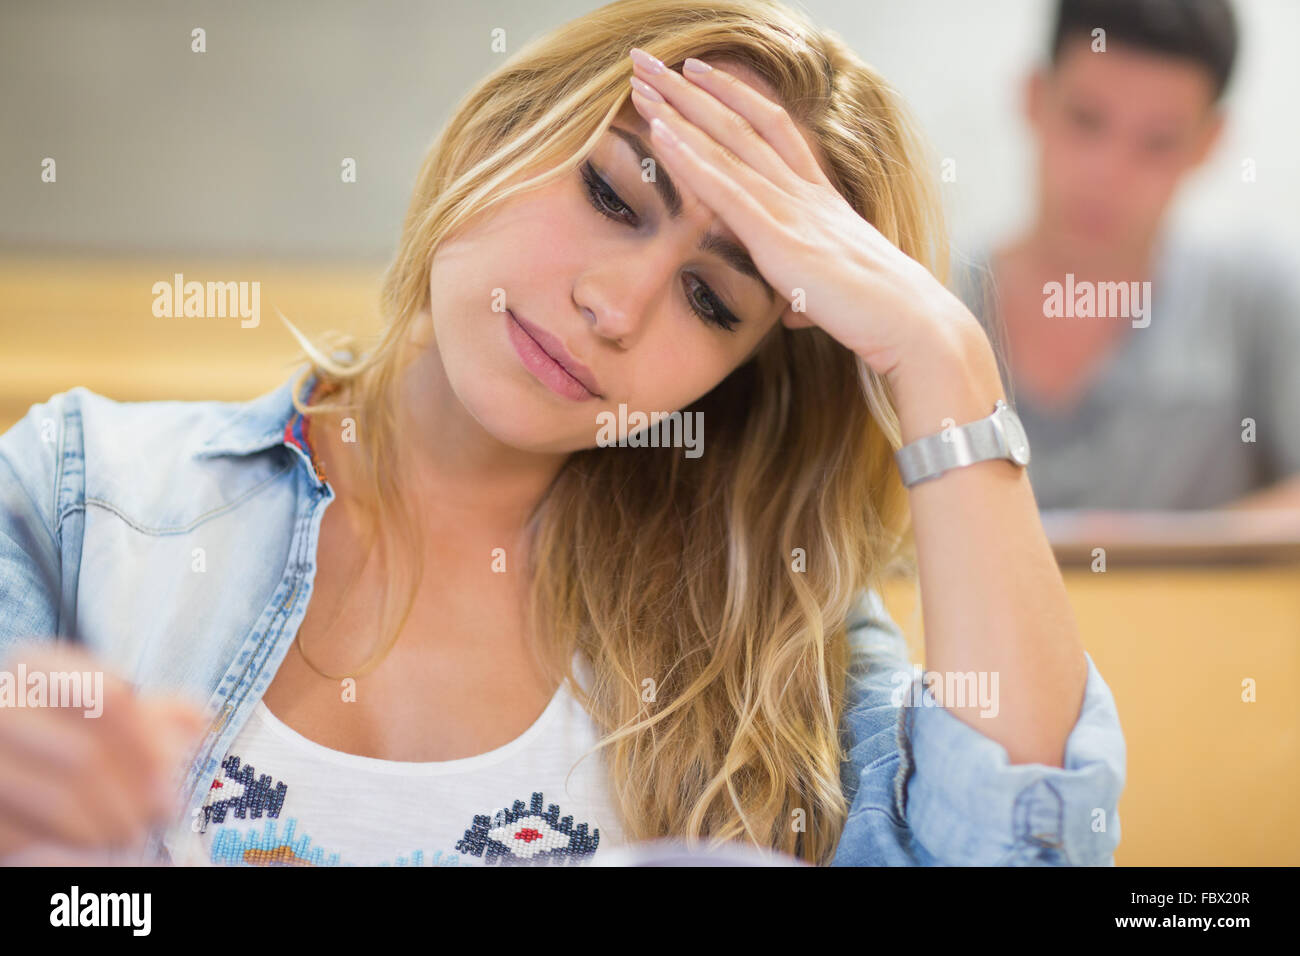 Attractive female student thinking during exam Stock Photo